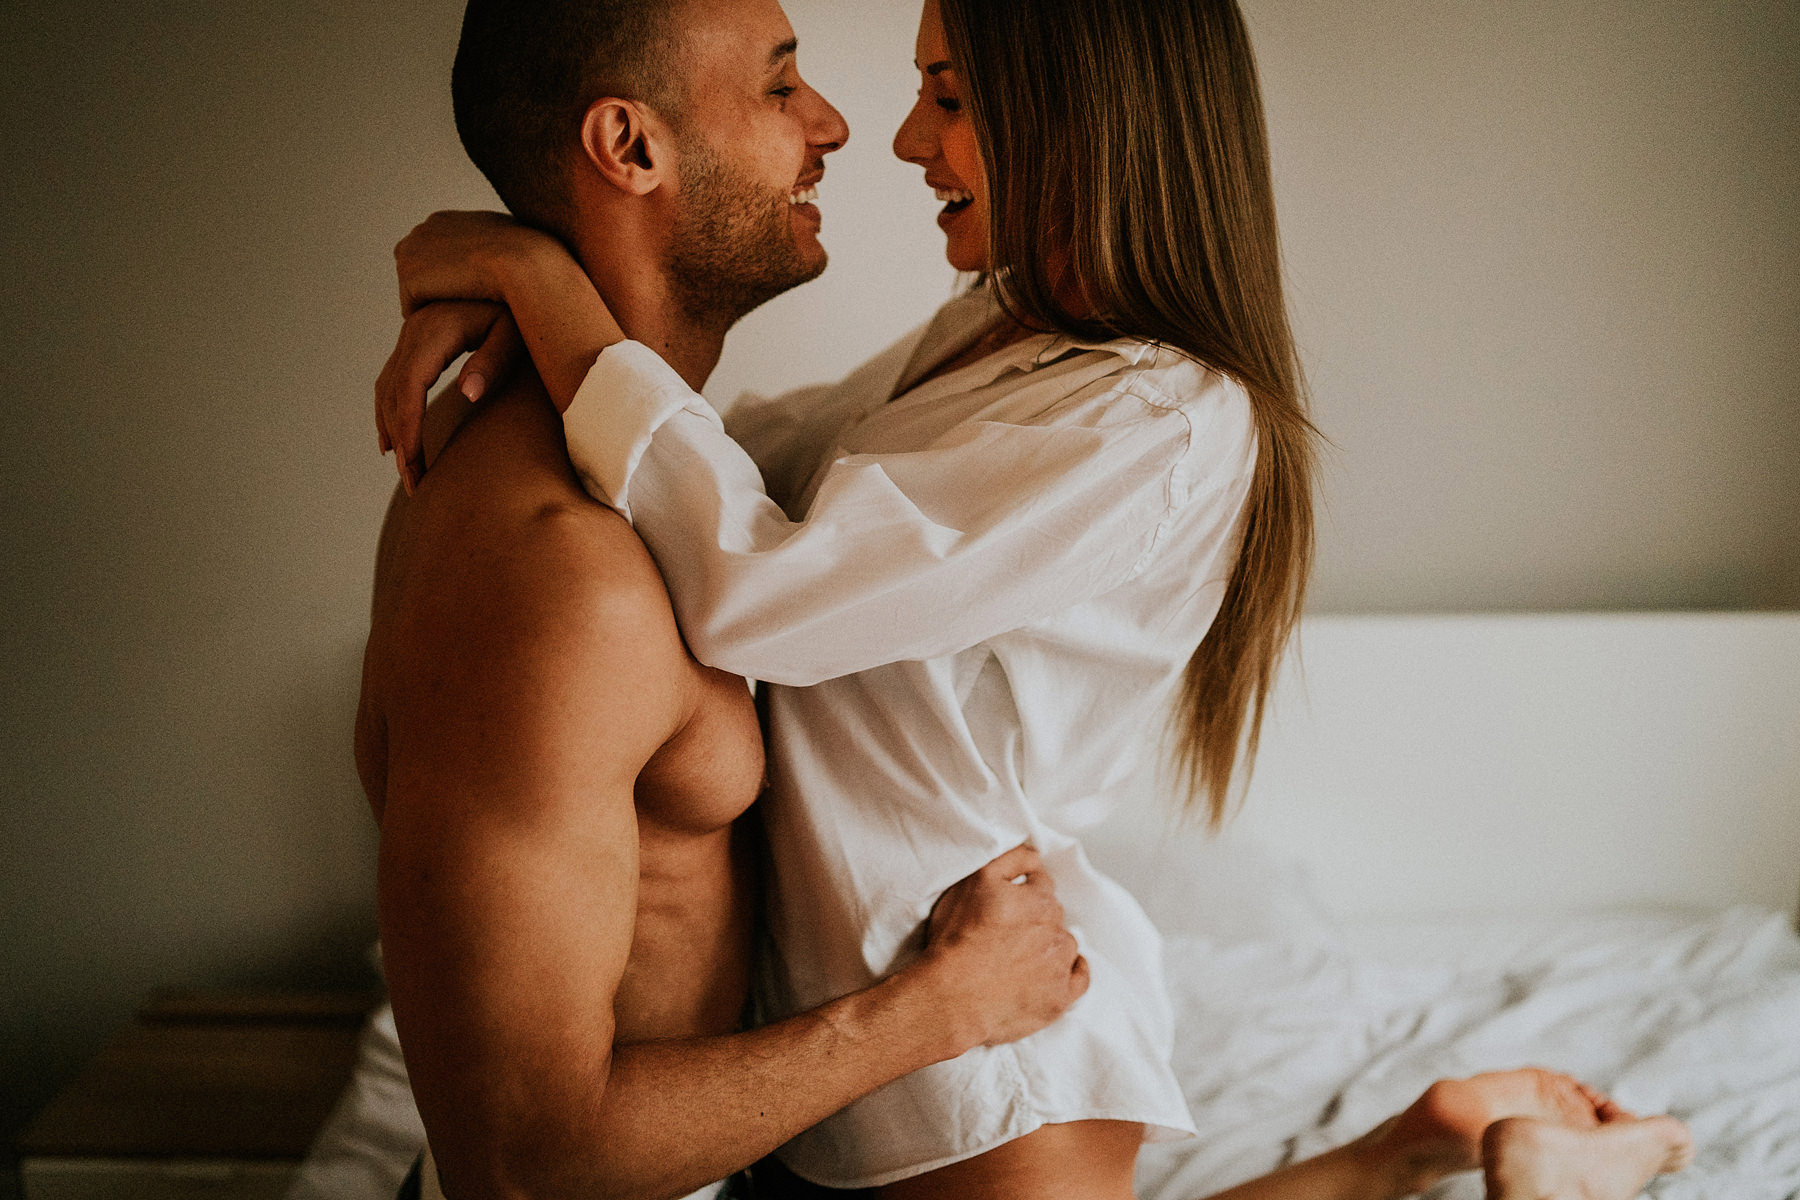 Intimate photo session in an apartment in Krakow